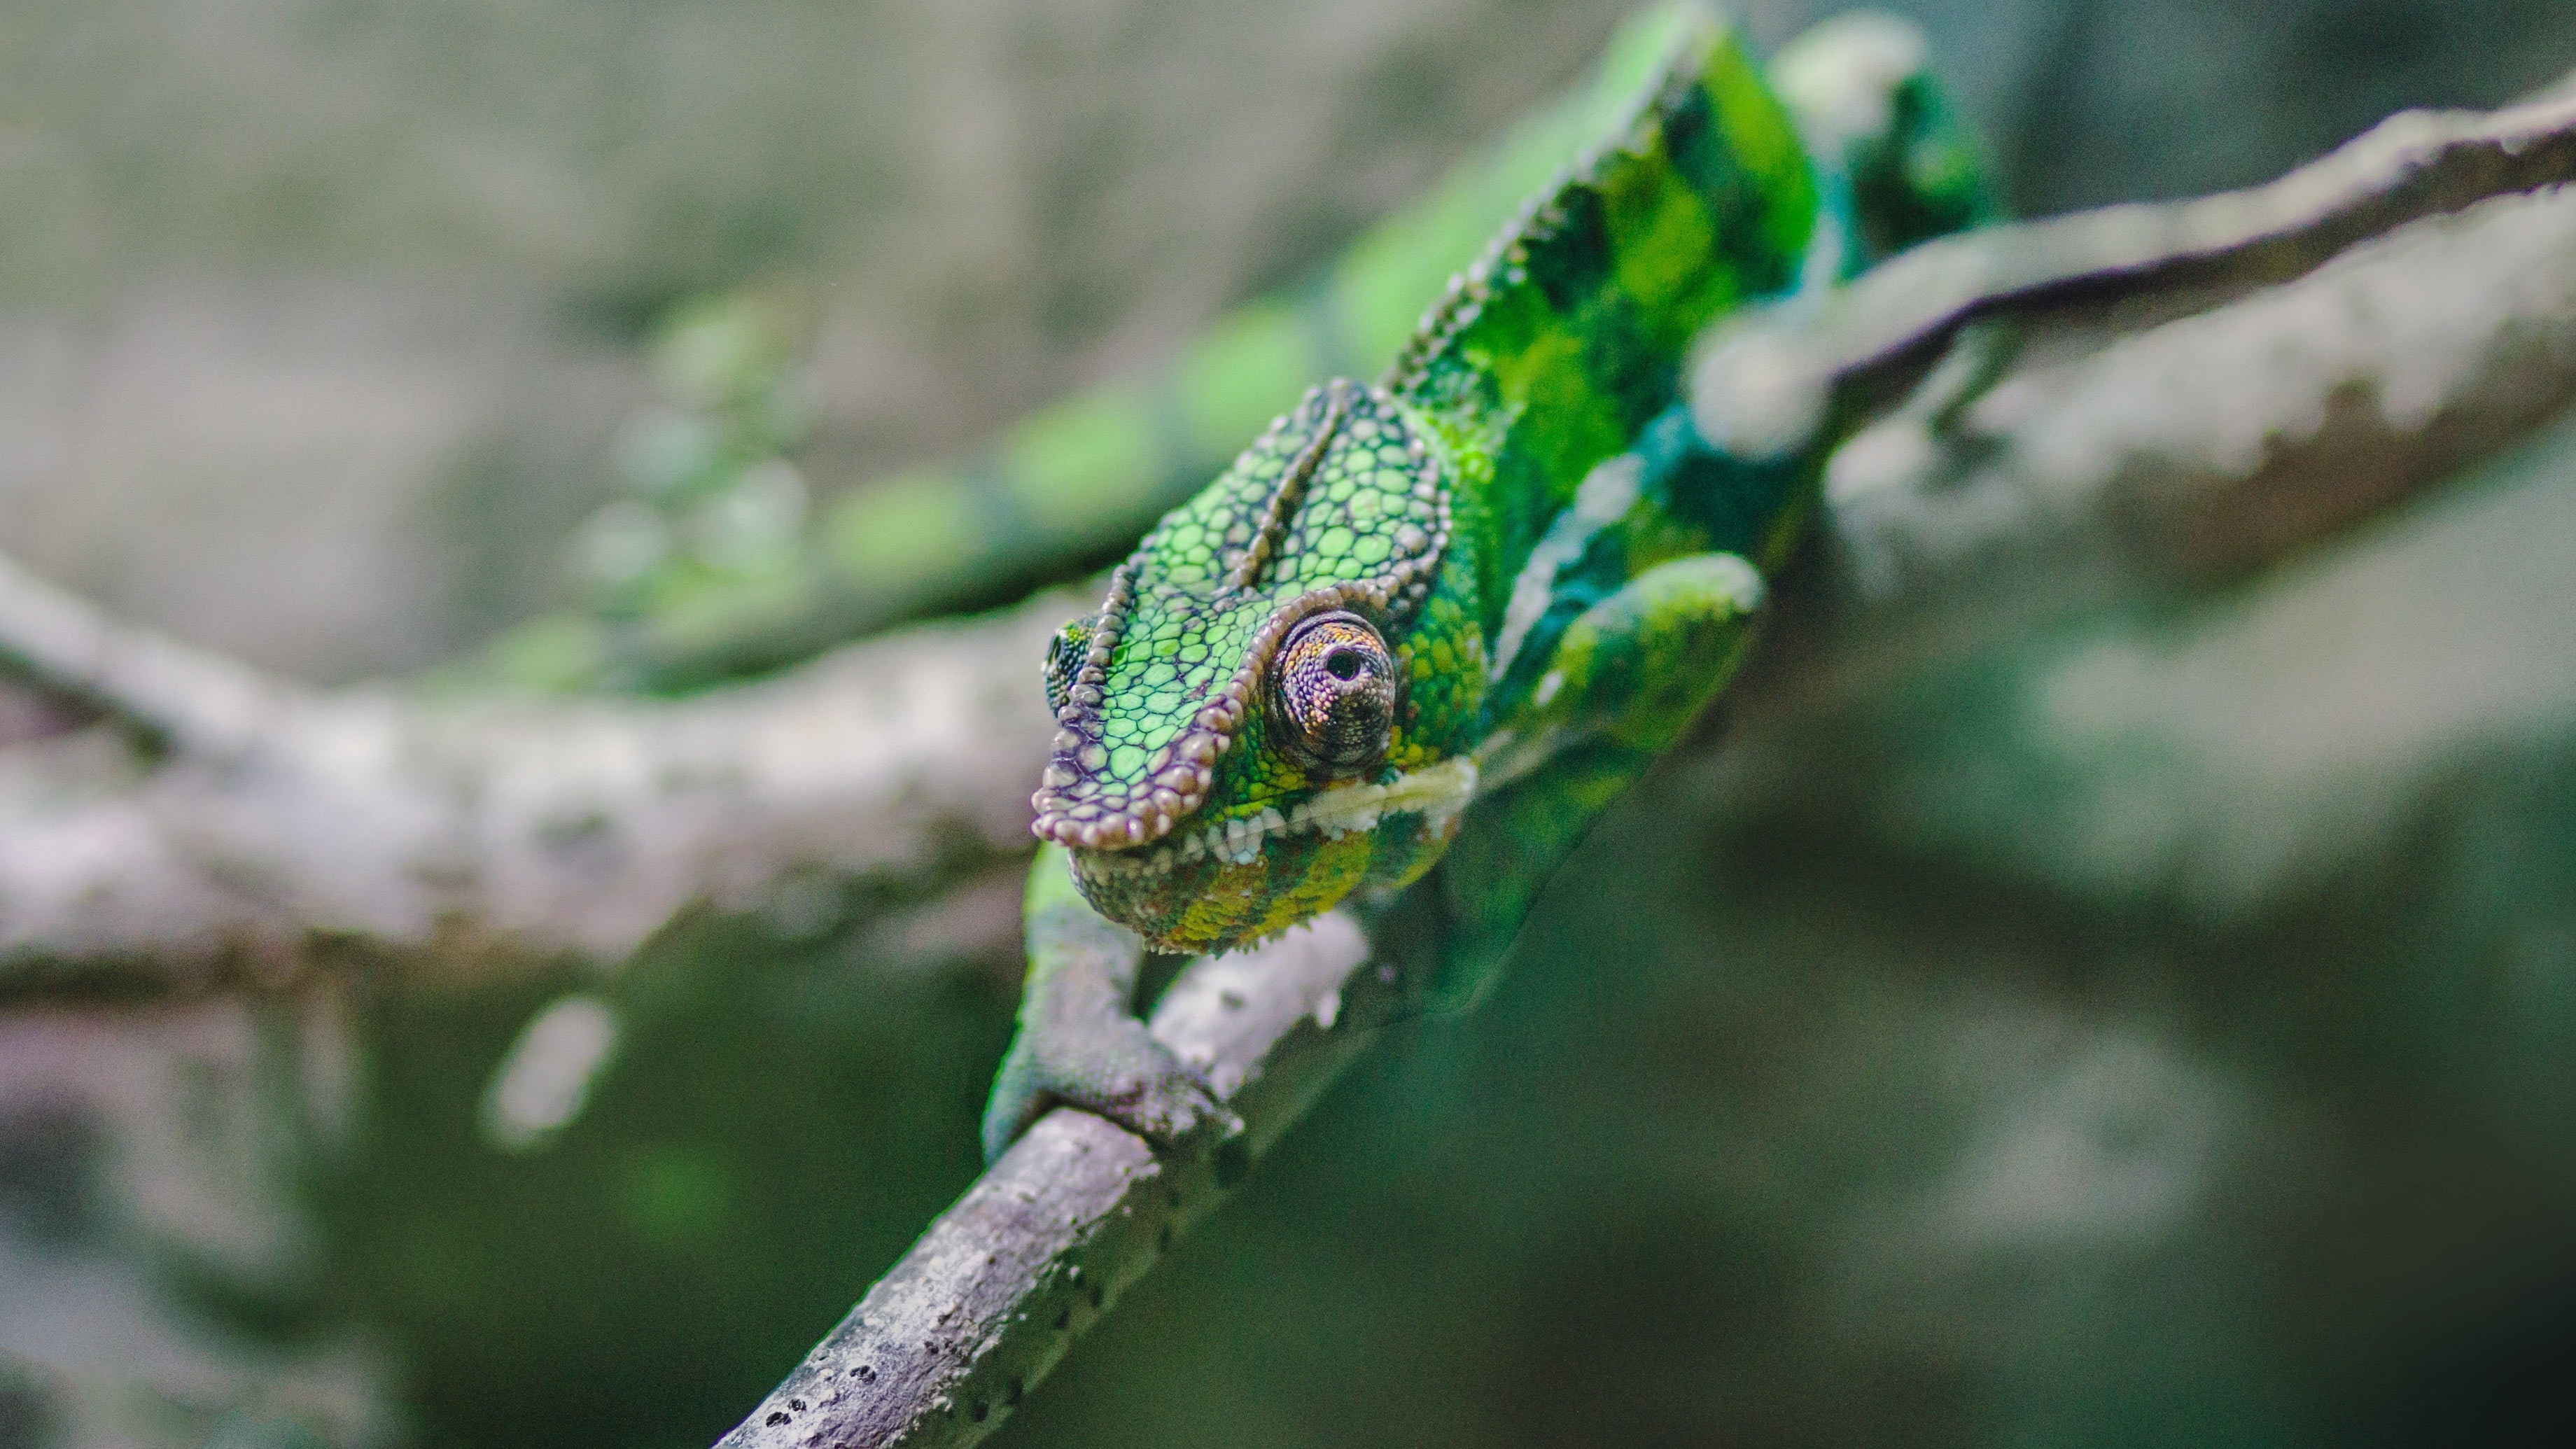 selective focus photography of green chameleon